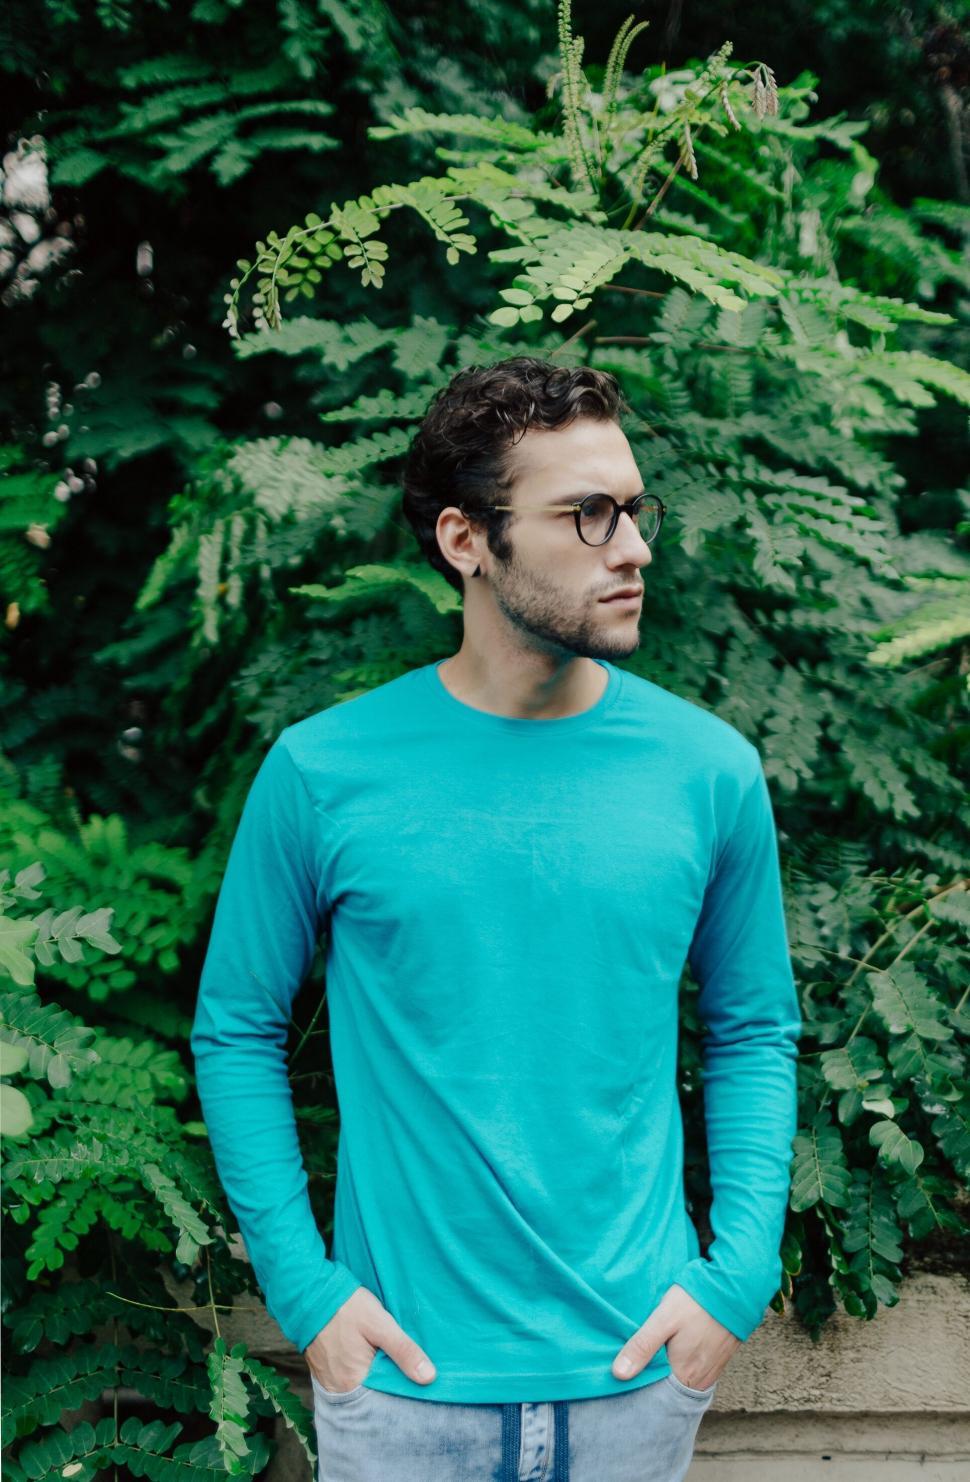 Free Image of Man in blue shirt against greenery 